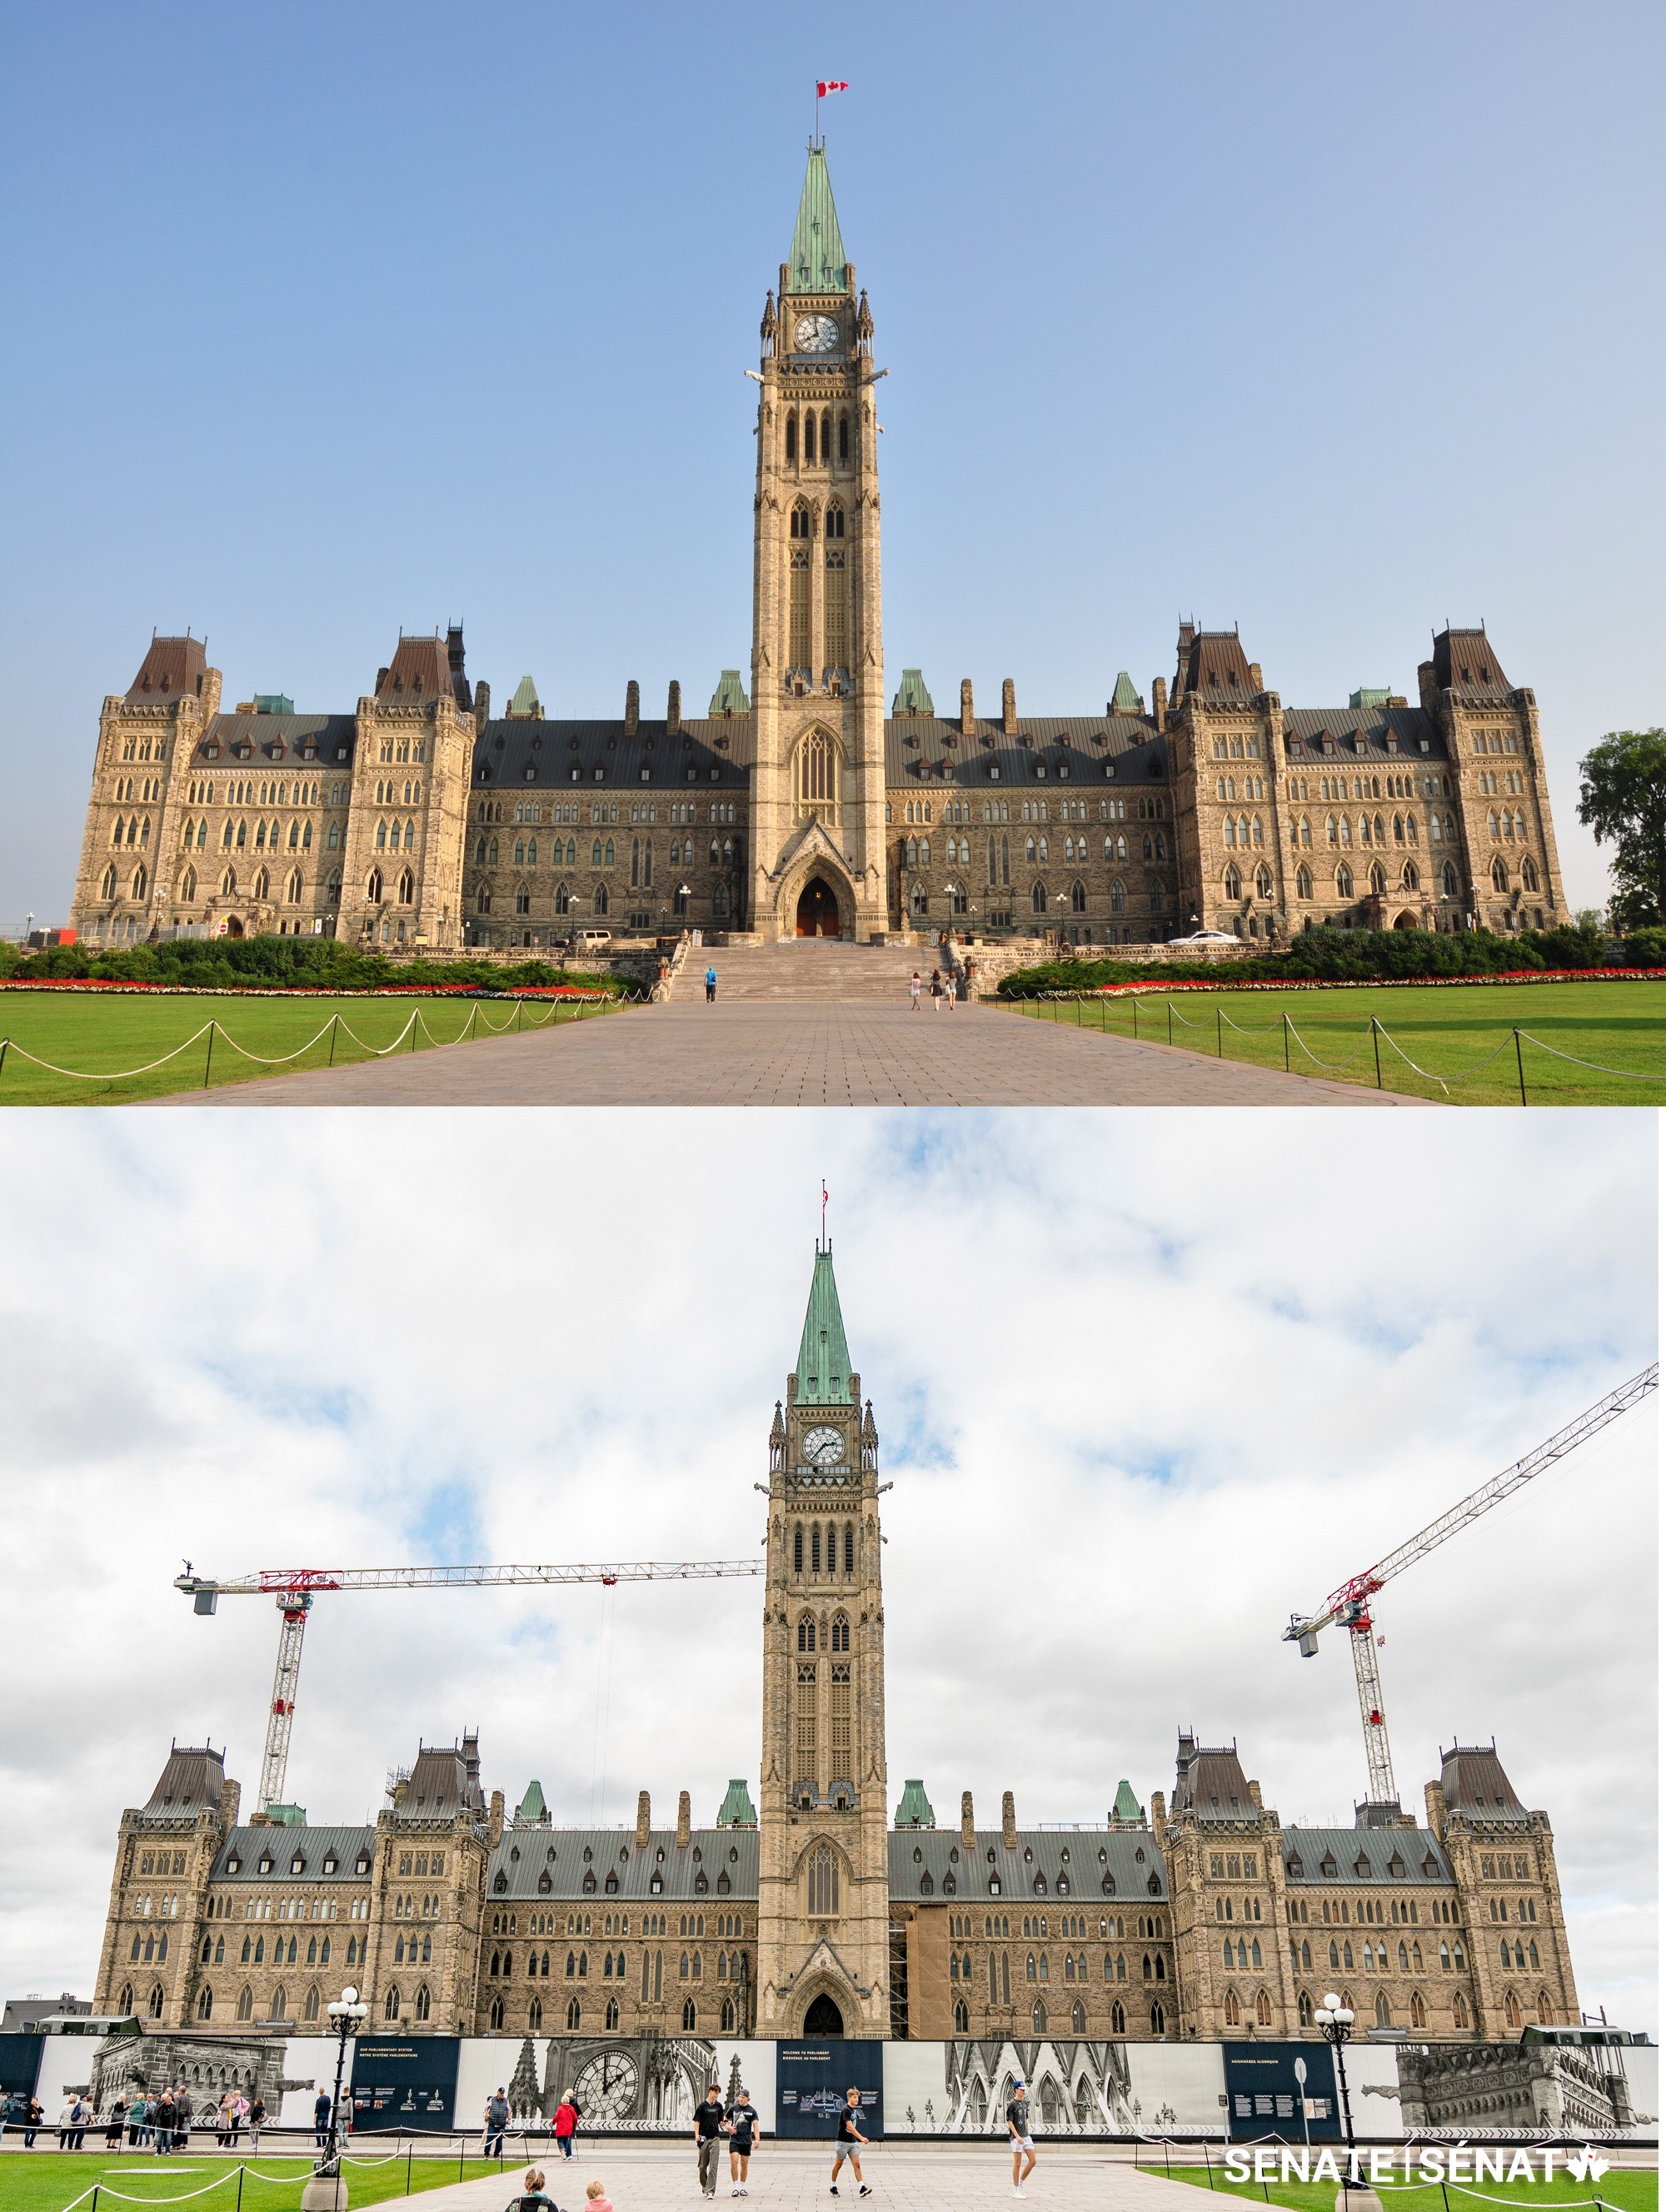 Parliament Hill is a hub of construction activity. One of the first orders of business in Centre Block’s rehabilitation is to upgrade this historic building to meet modern seismic standards. Crews are also excavating the lawn in front of Centre Block to build an underground Parliament Welcome Centre.